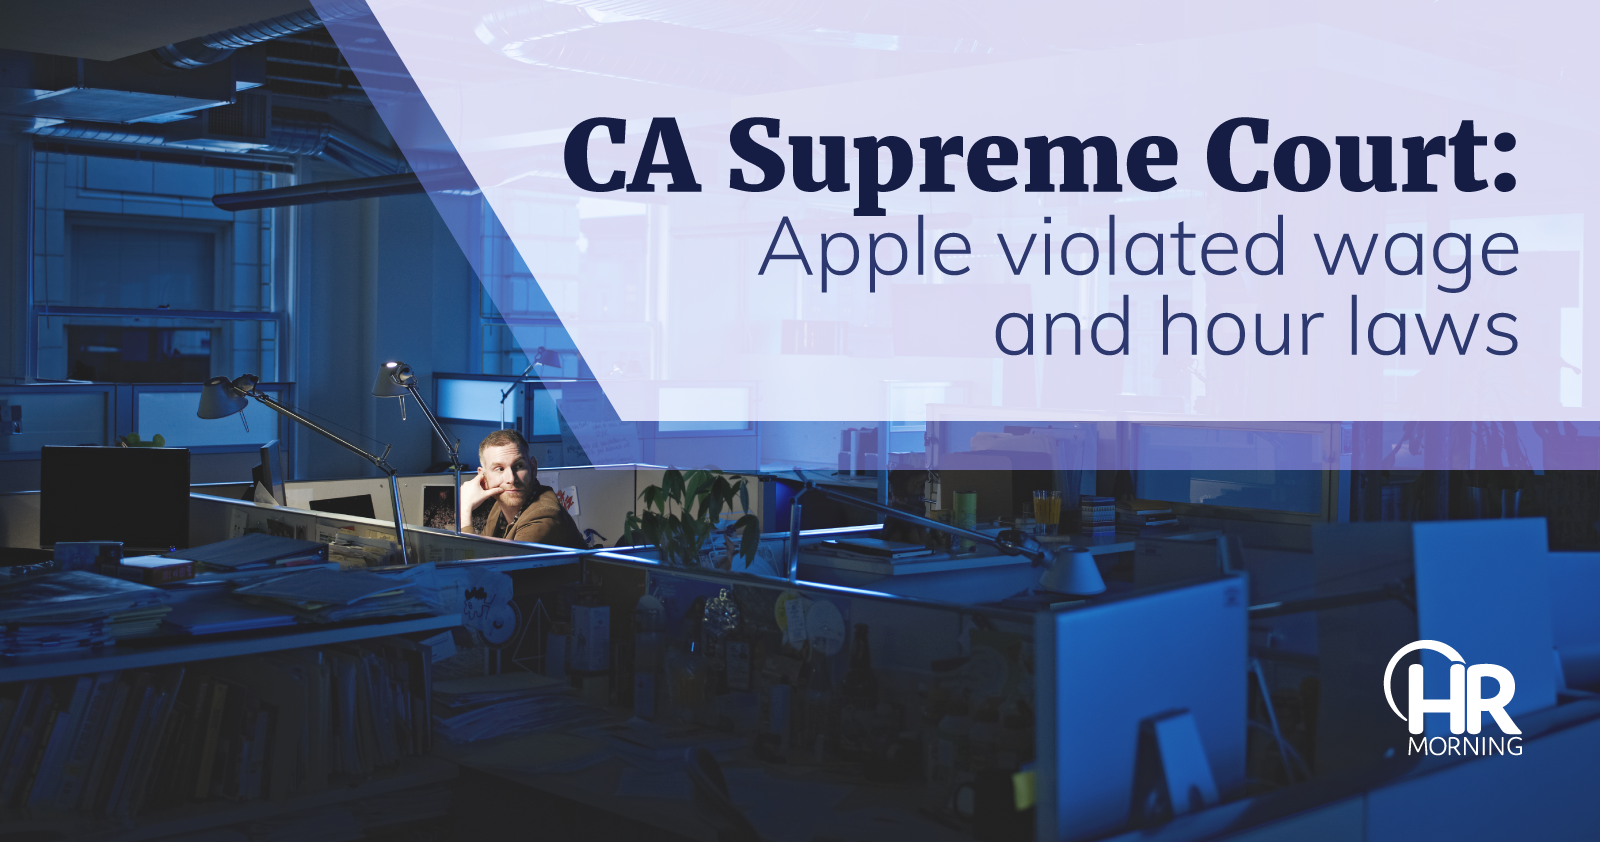 CA Supreme Court Apple violated wage and hour laws